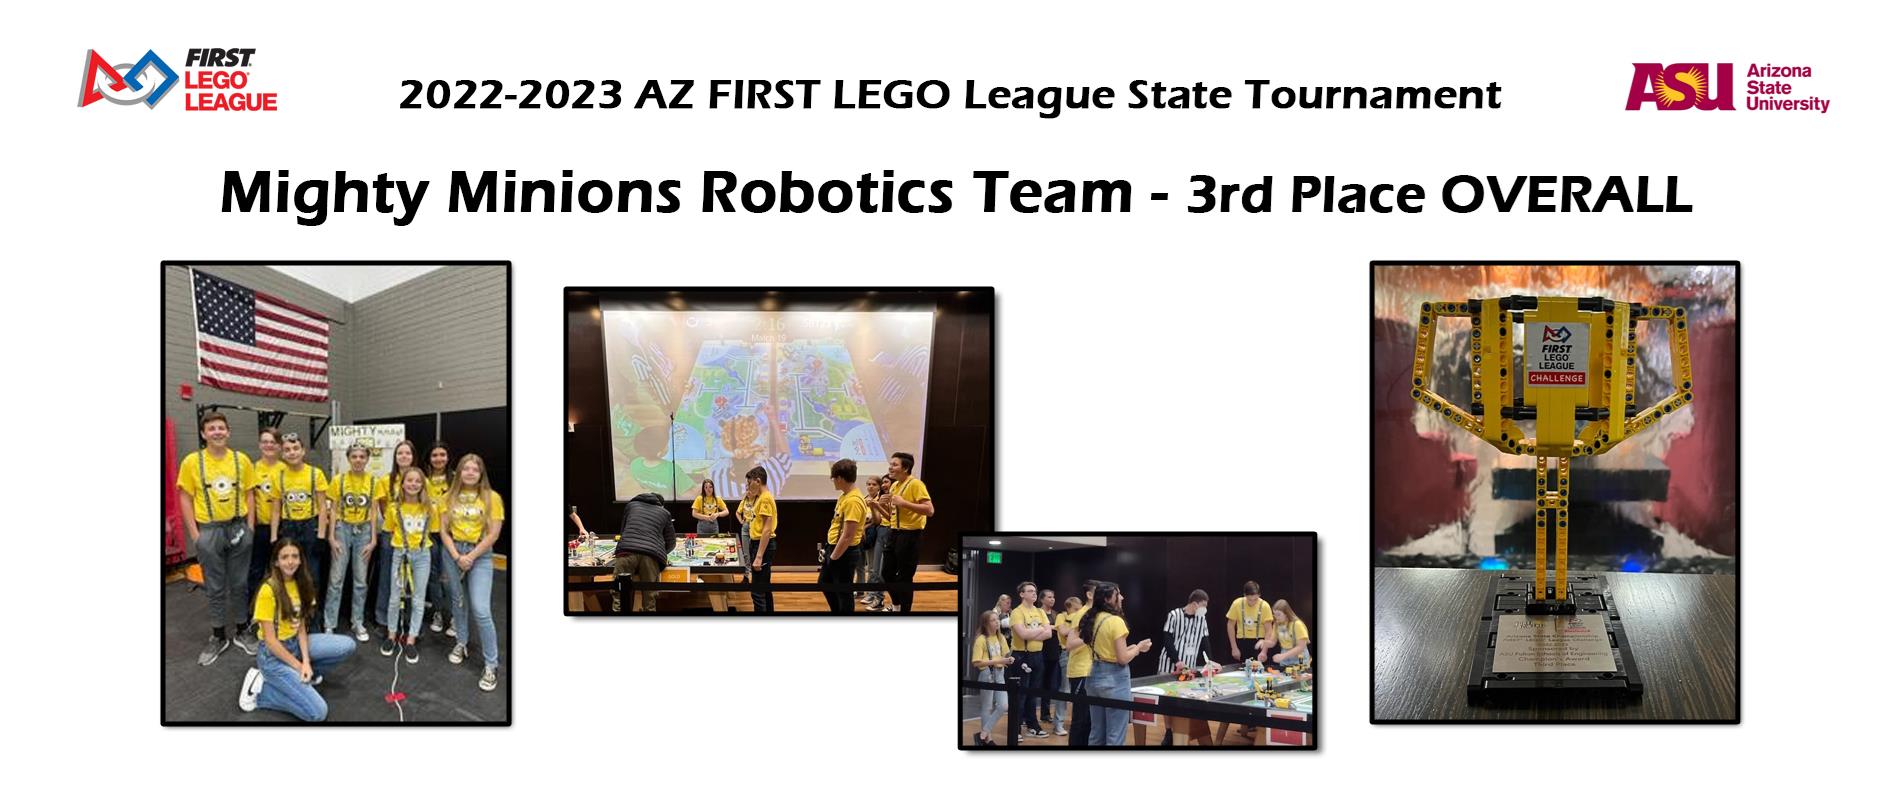 Mighty Minions Robotics Team places 3rd at State Championships